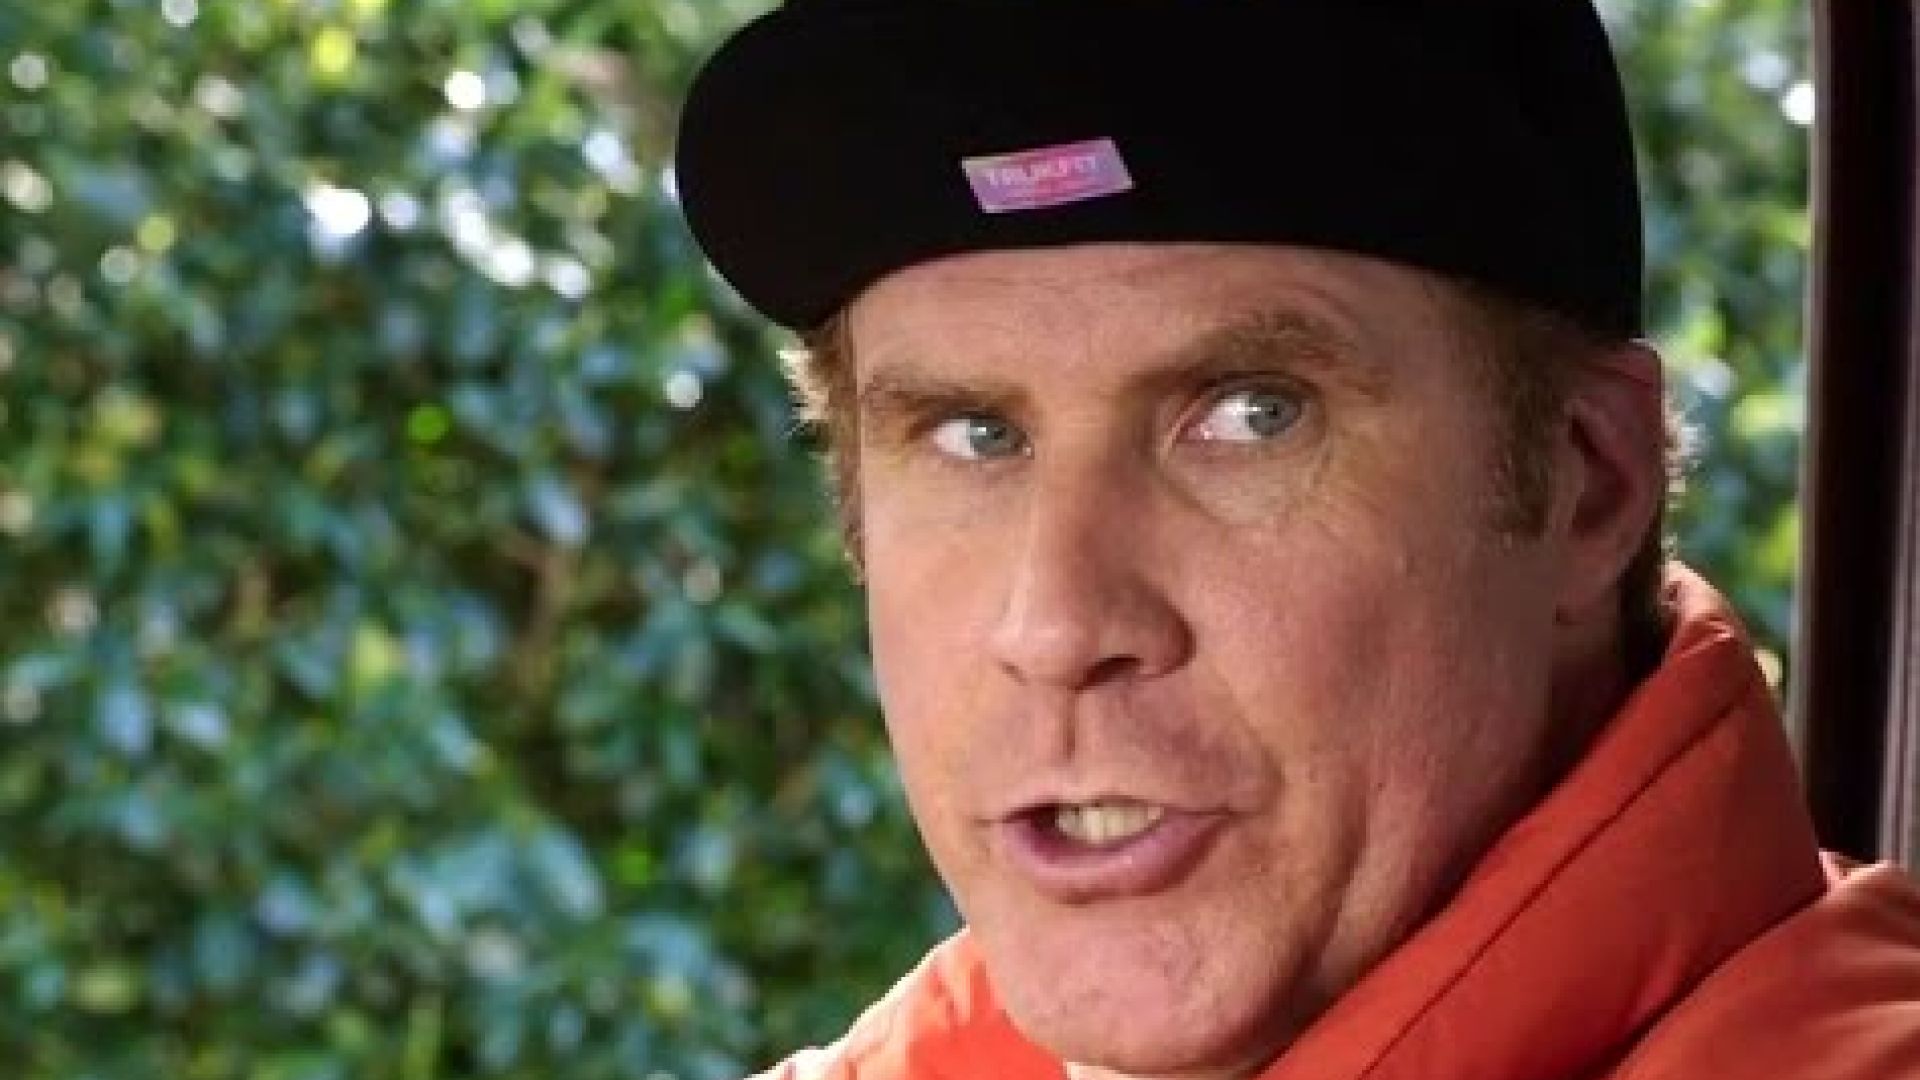 Official Red Band Trailer for 'Get Hard'